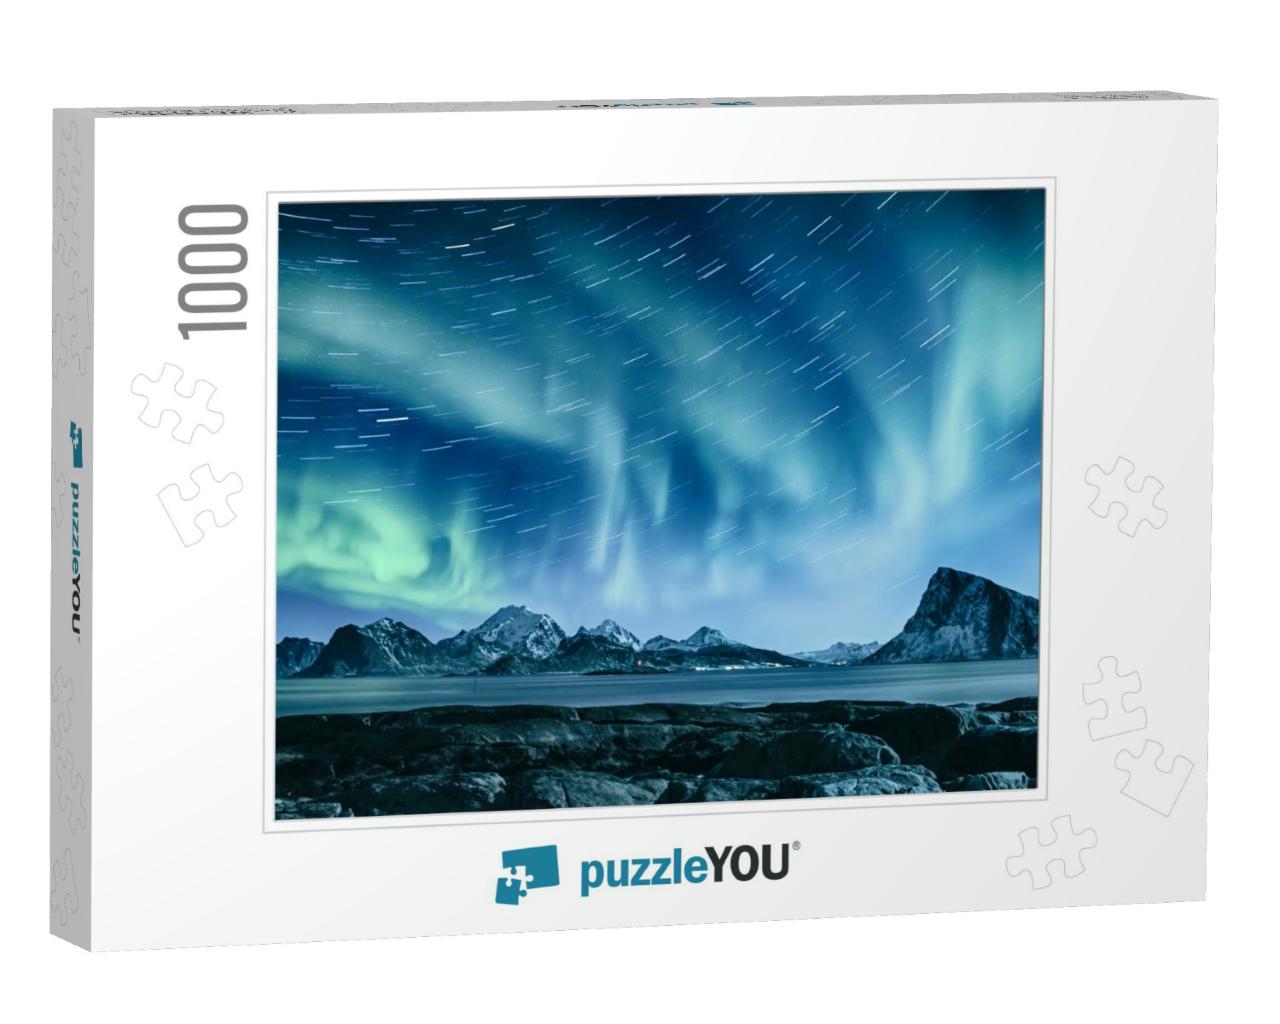 Northern Lights, Aurora Borealis Shining Green in Night S... Jigsaw Puzzle with 1000 pieces